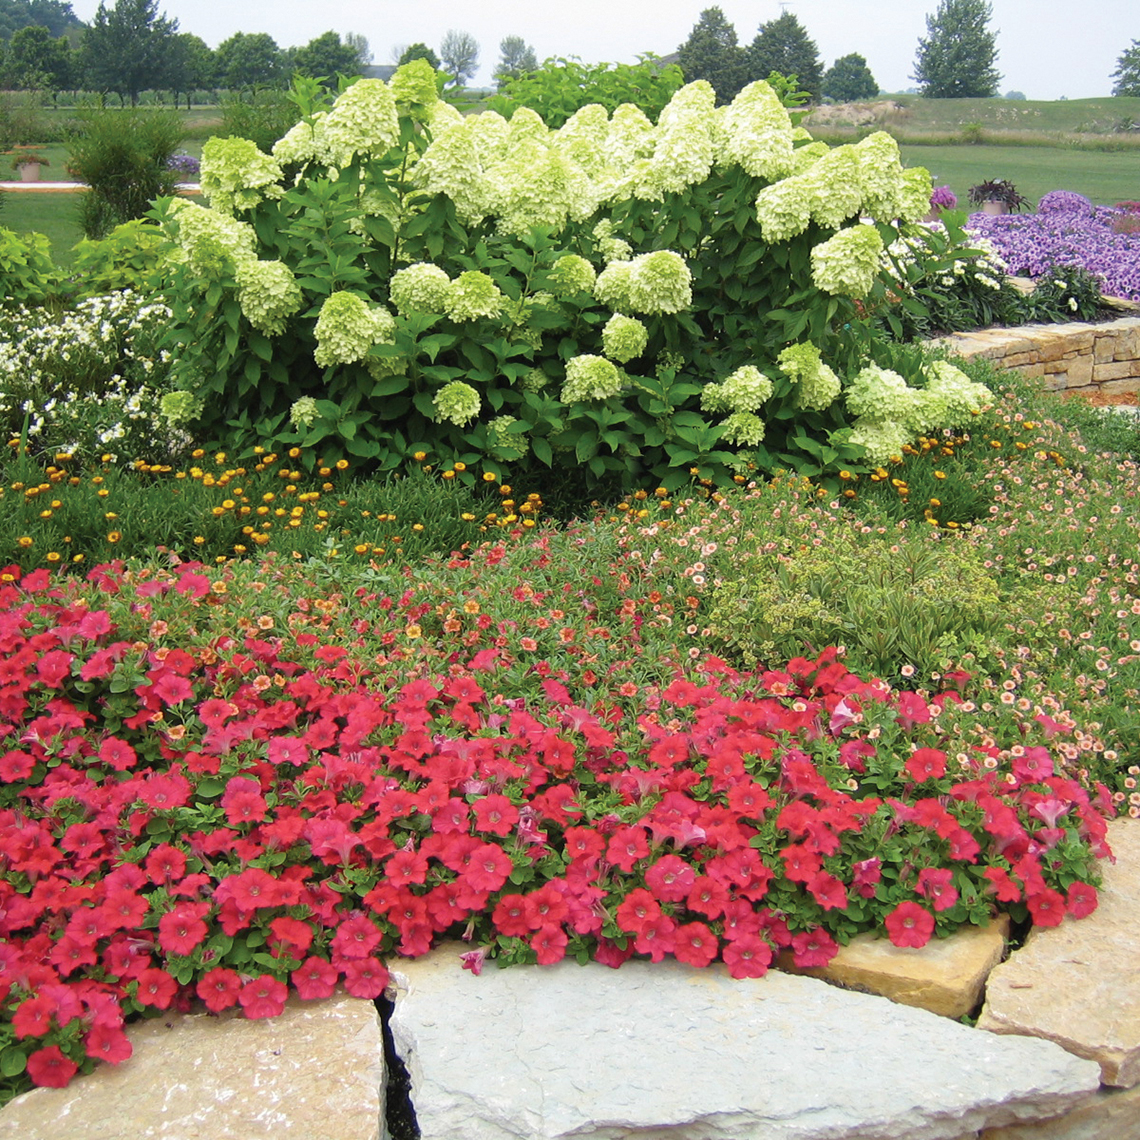 Limelight hydrangea blooming in a landscape surrounded by colorful annual flowers